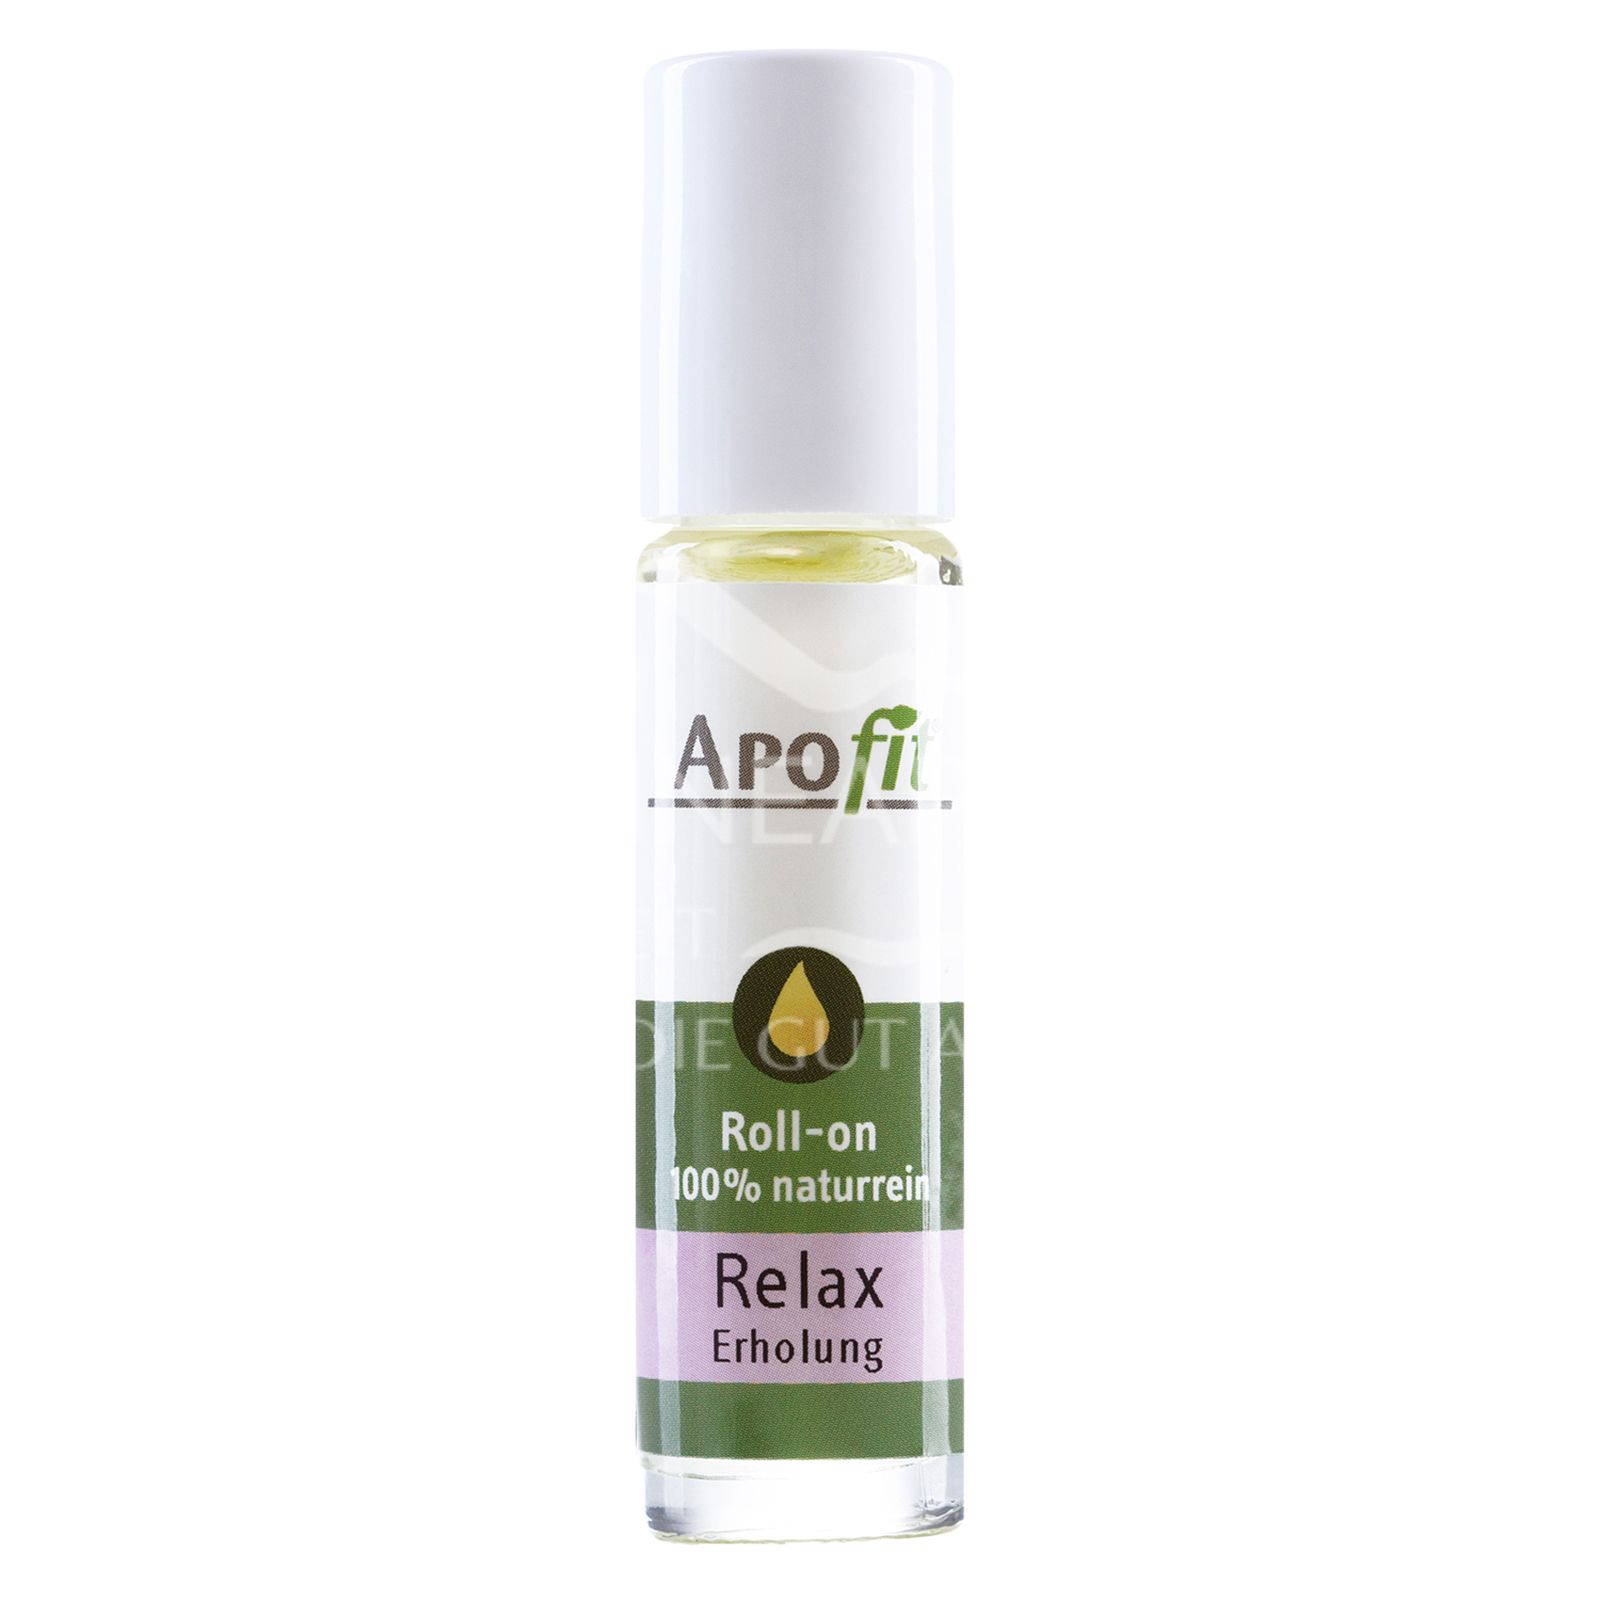 APOfit Aroma Roll-on Relax